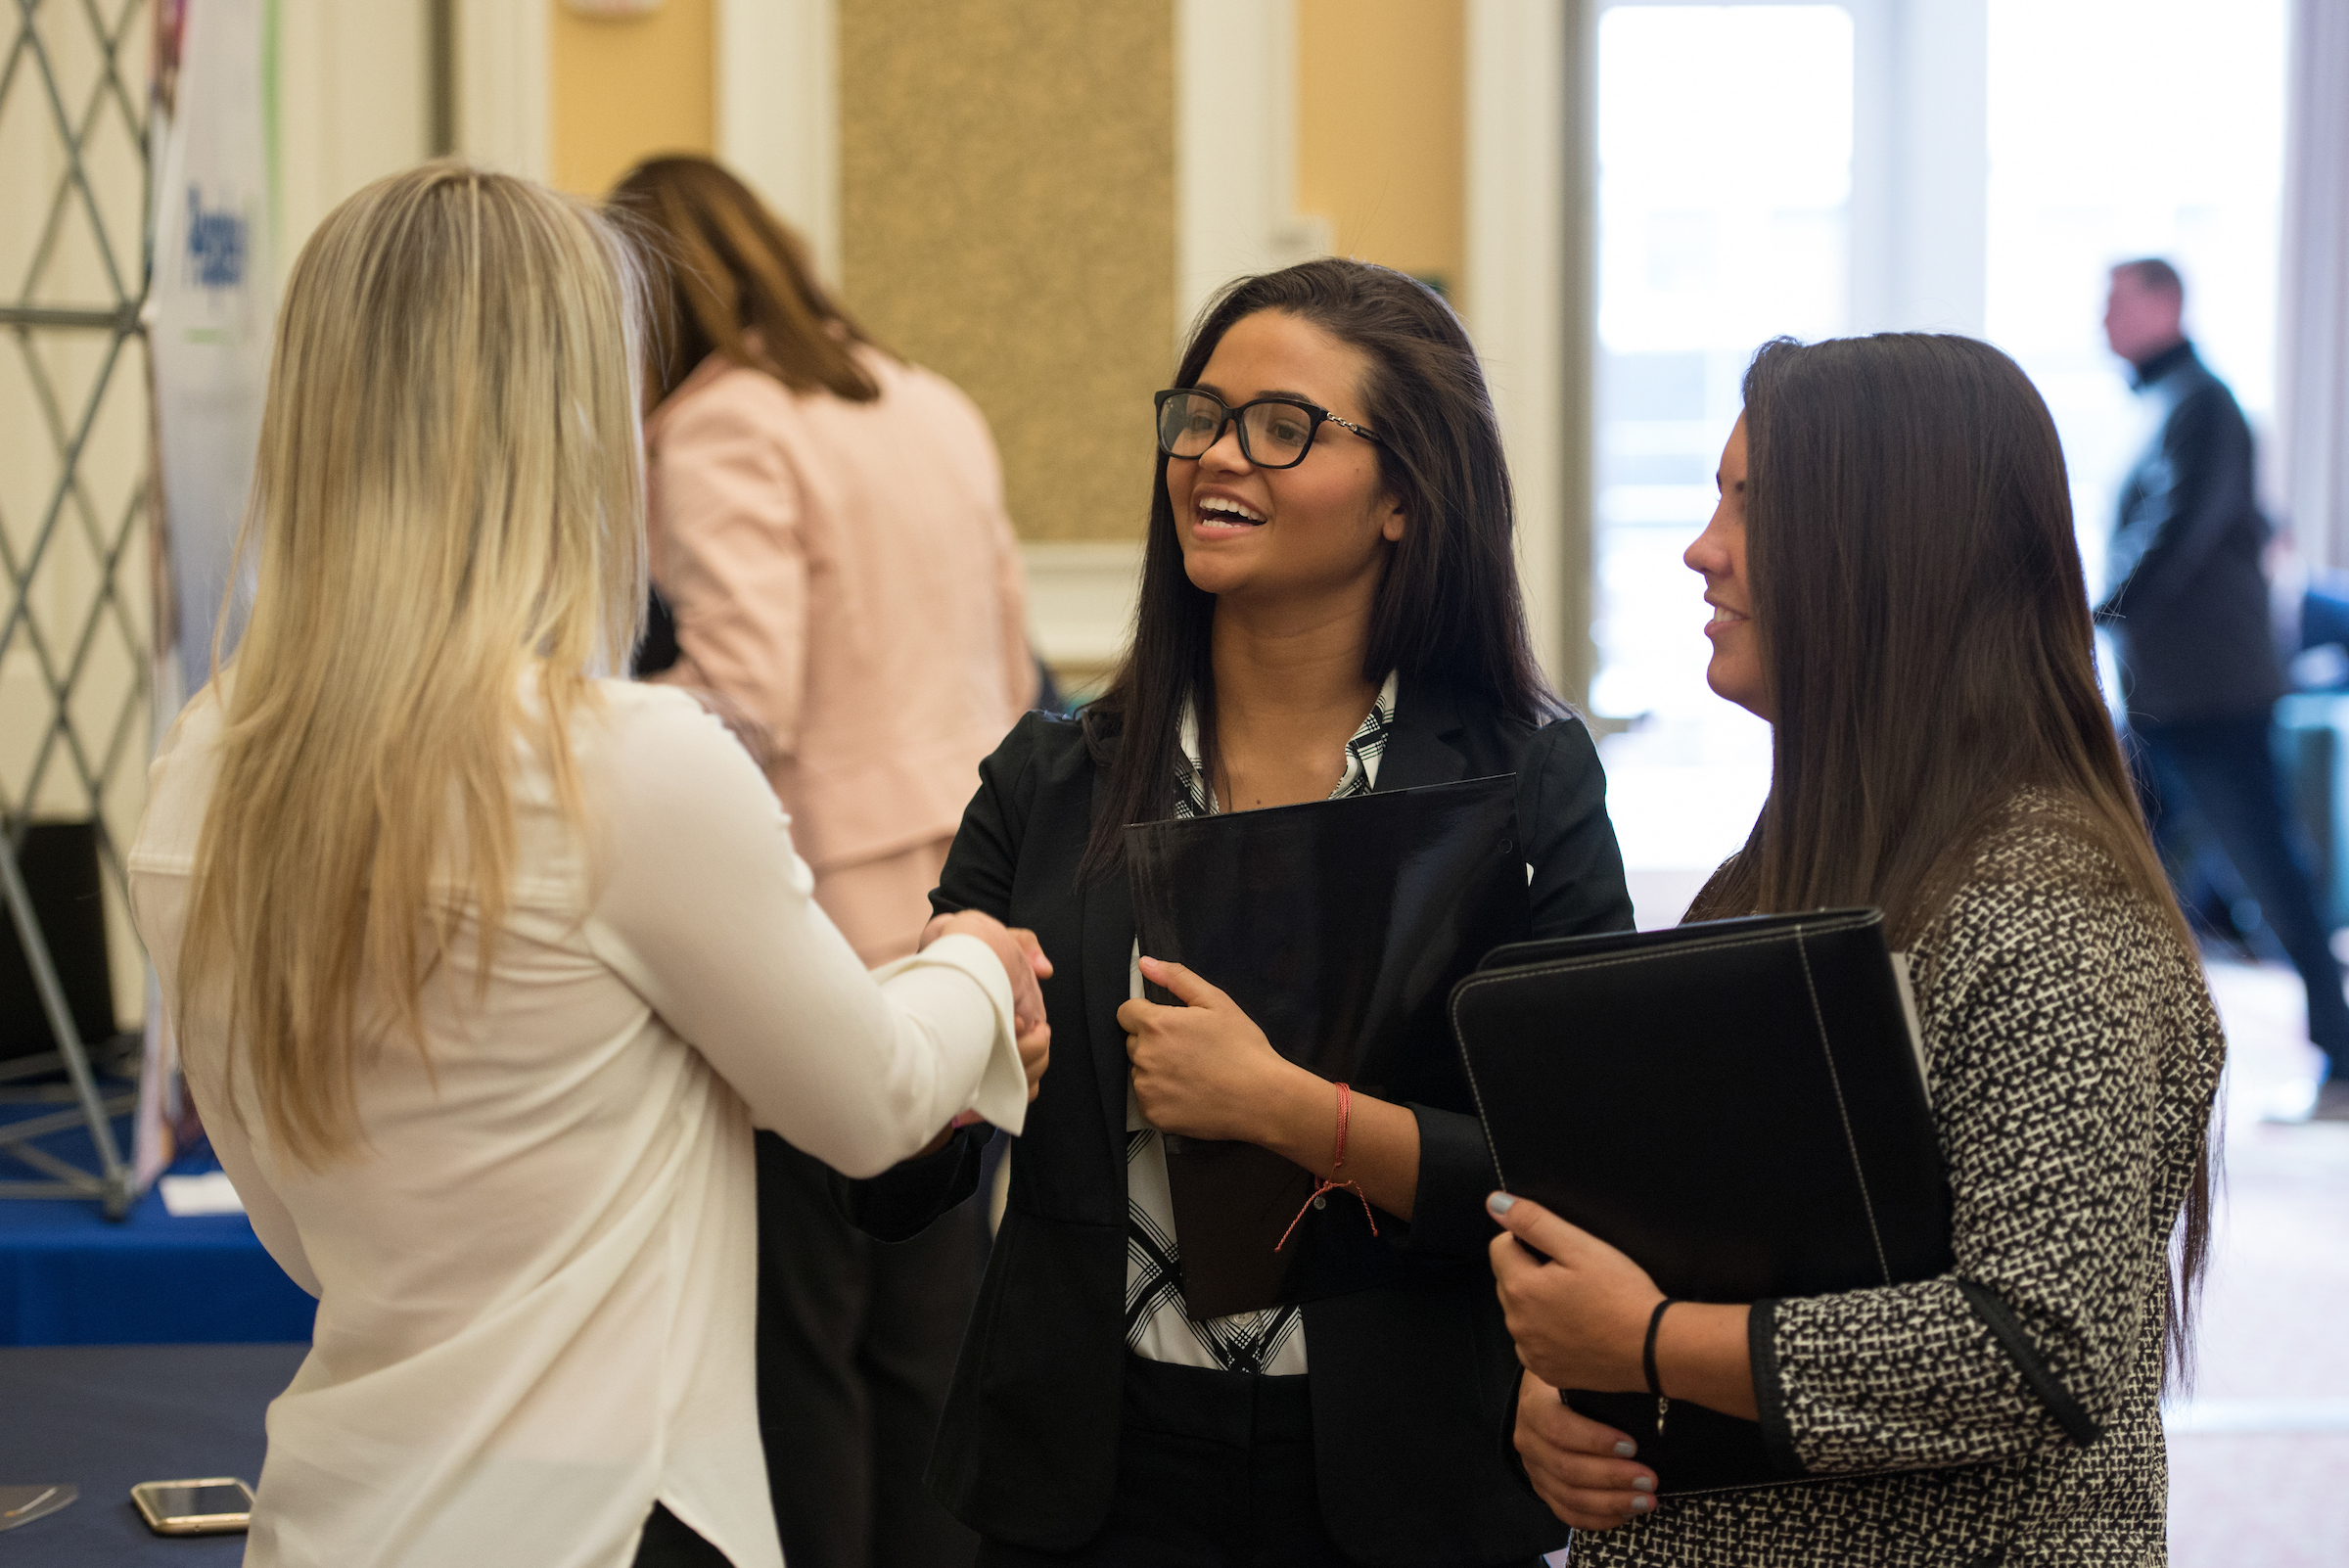 Spring Career and Internship Fair to be held Feb. 12